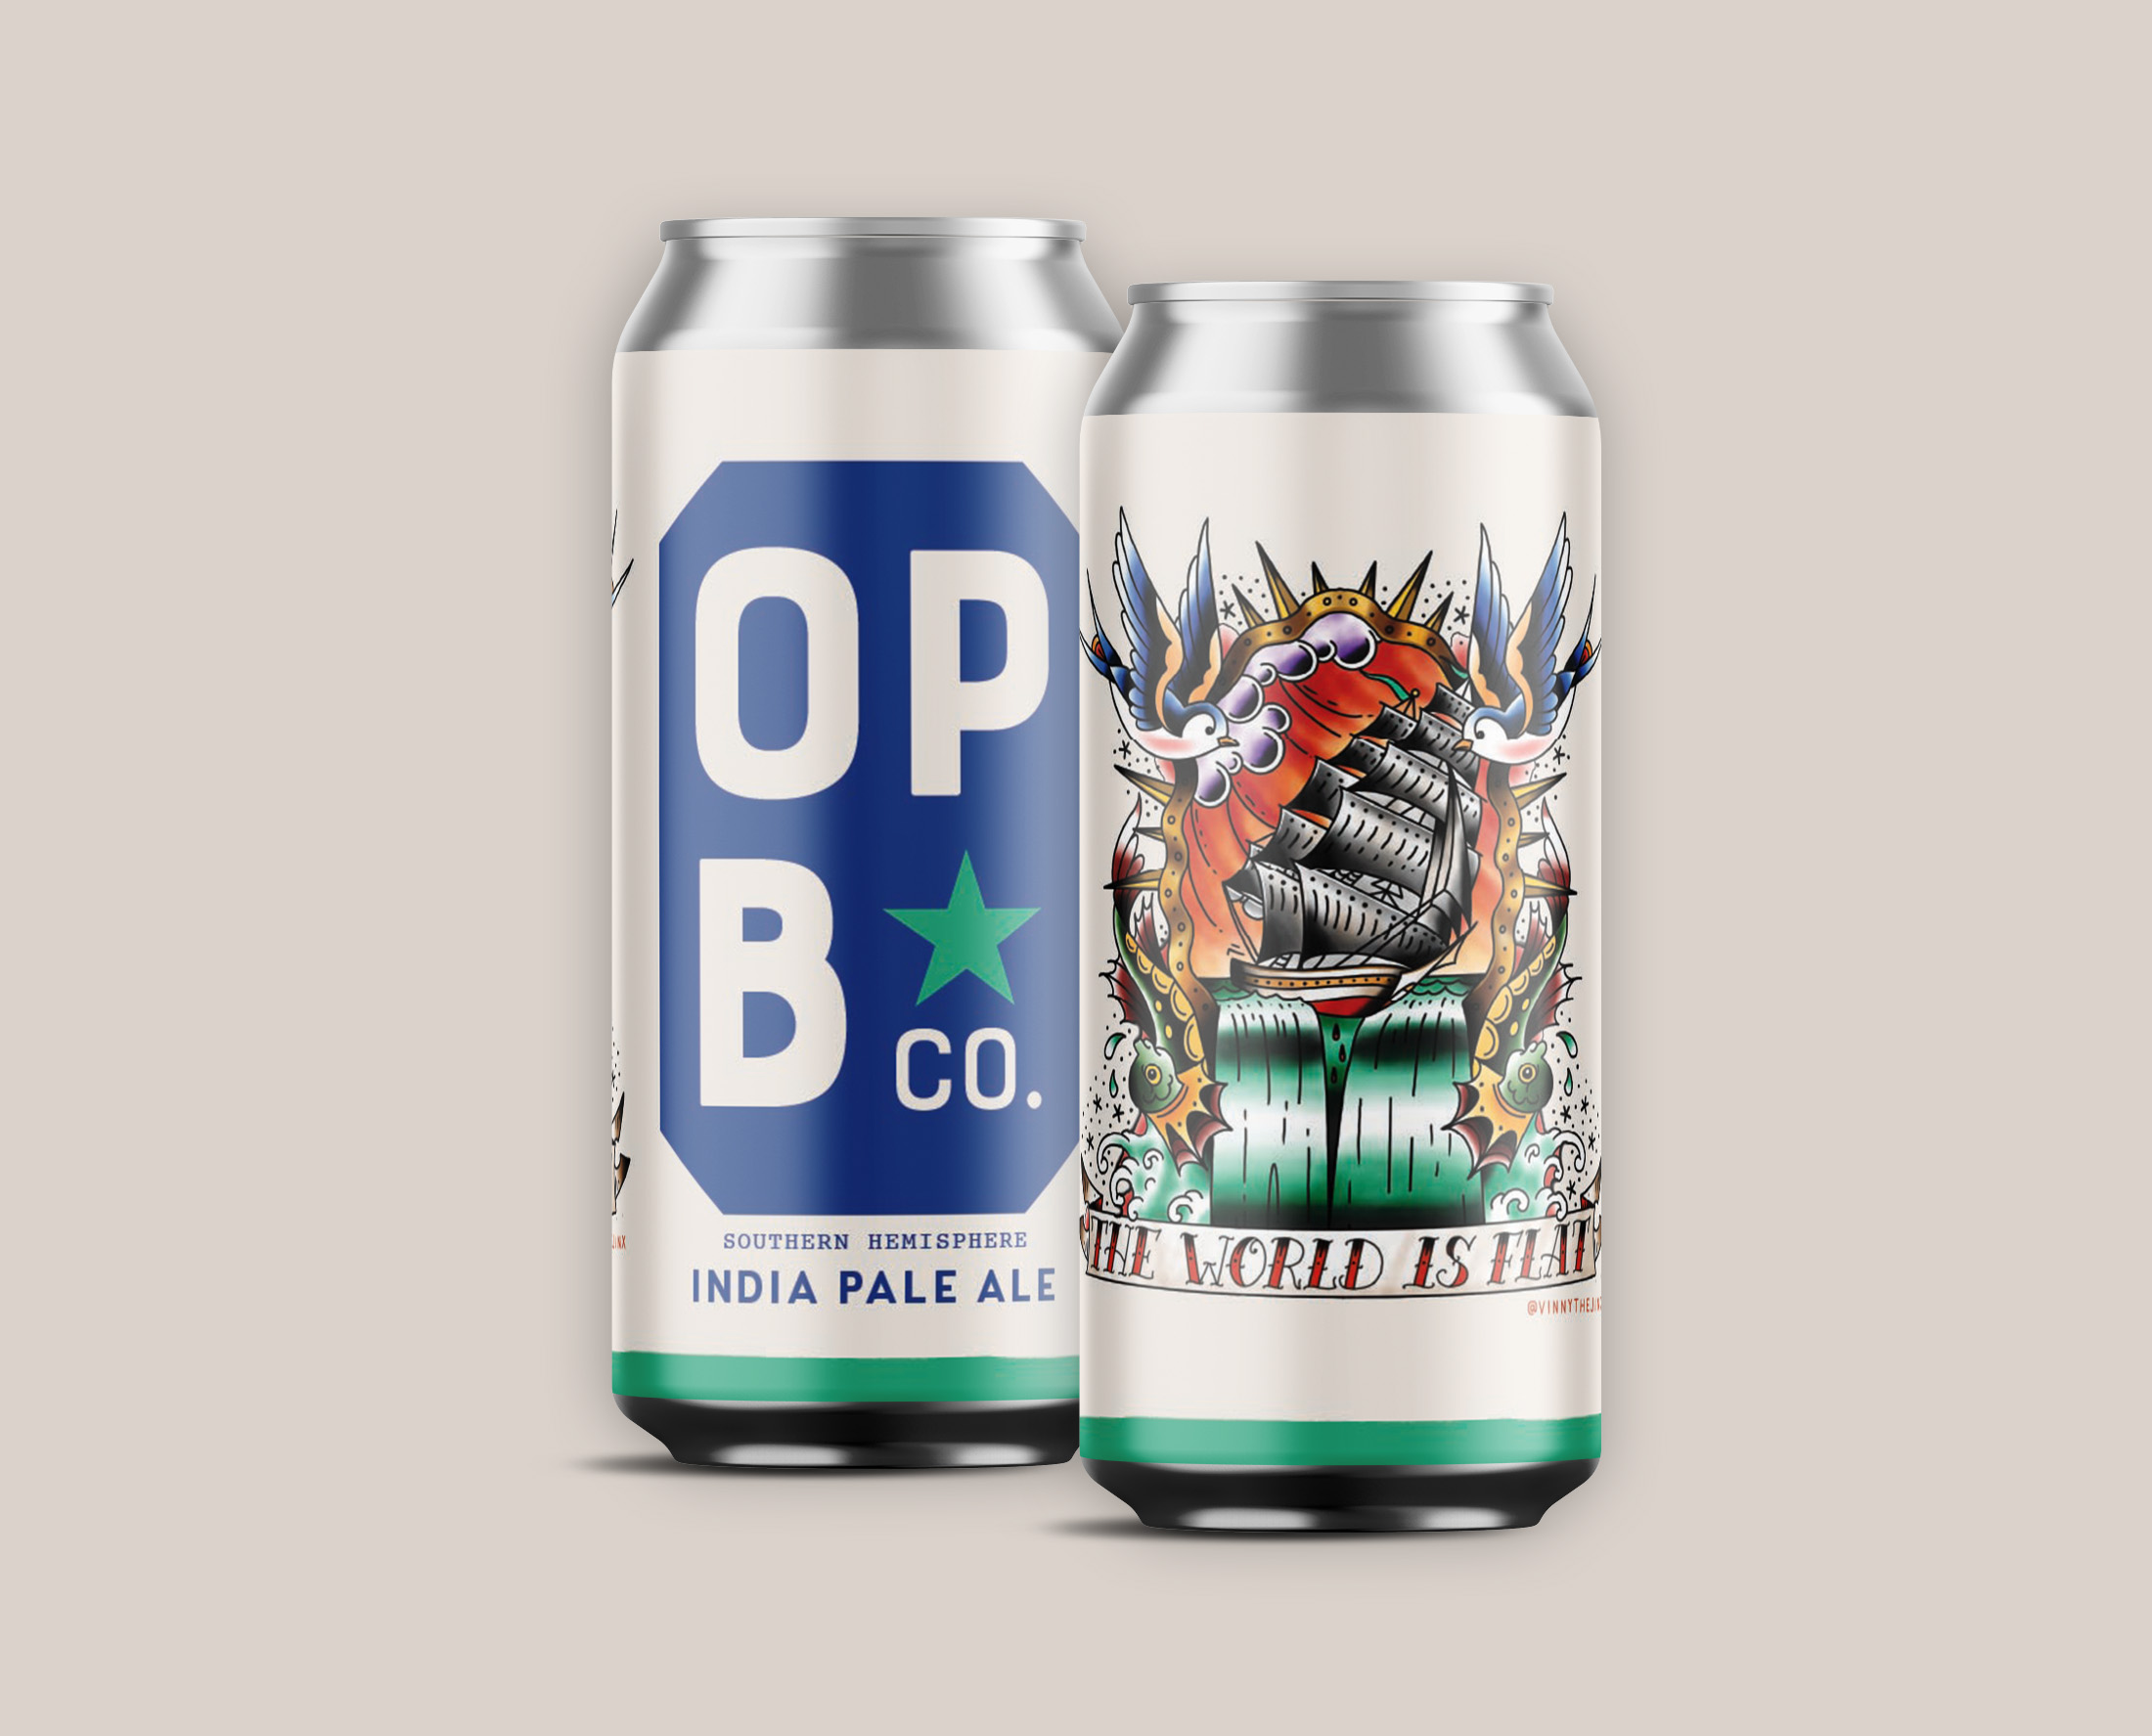 Digital rendering of the world is flat Southern Hemisphere IPA beer. 2 cans featuring local art.